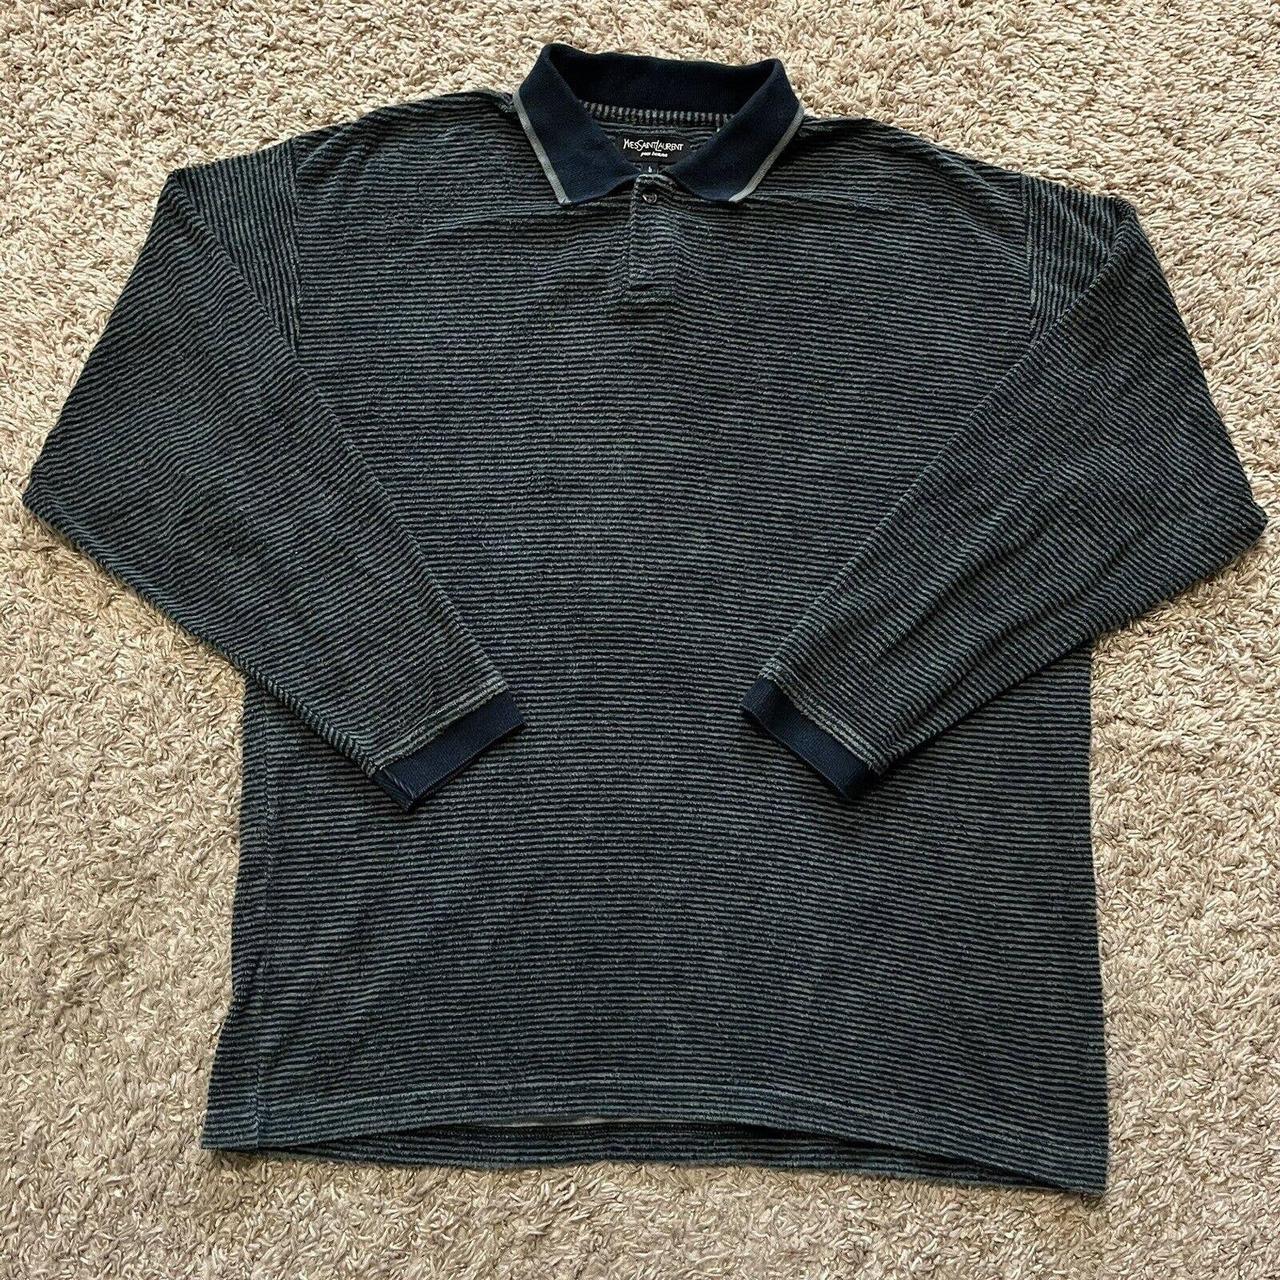 Yves Saint Laurent Terry Cloth Striped Rugby Polo... - Depop